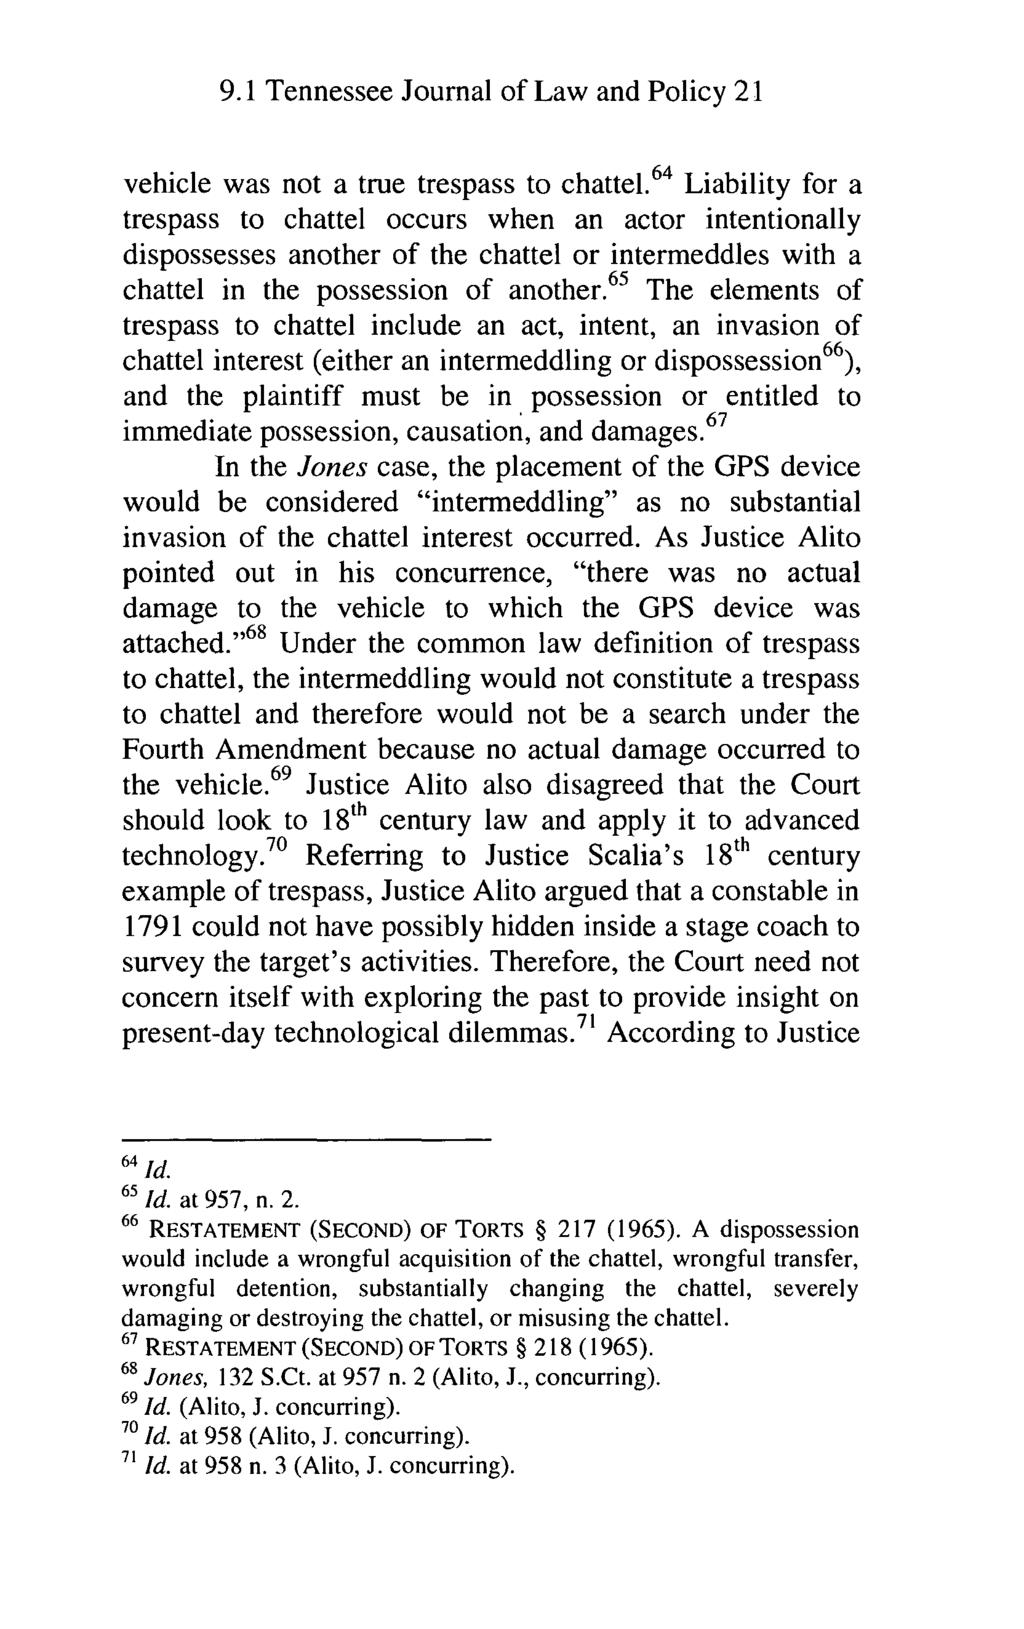 Reid: United States v. Jones: Big Brother and the "Common Good" versus 9.1 Tennessee Journal of Law and Policy 21 vehicle was not a true trespass to chattel.